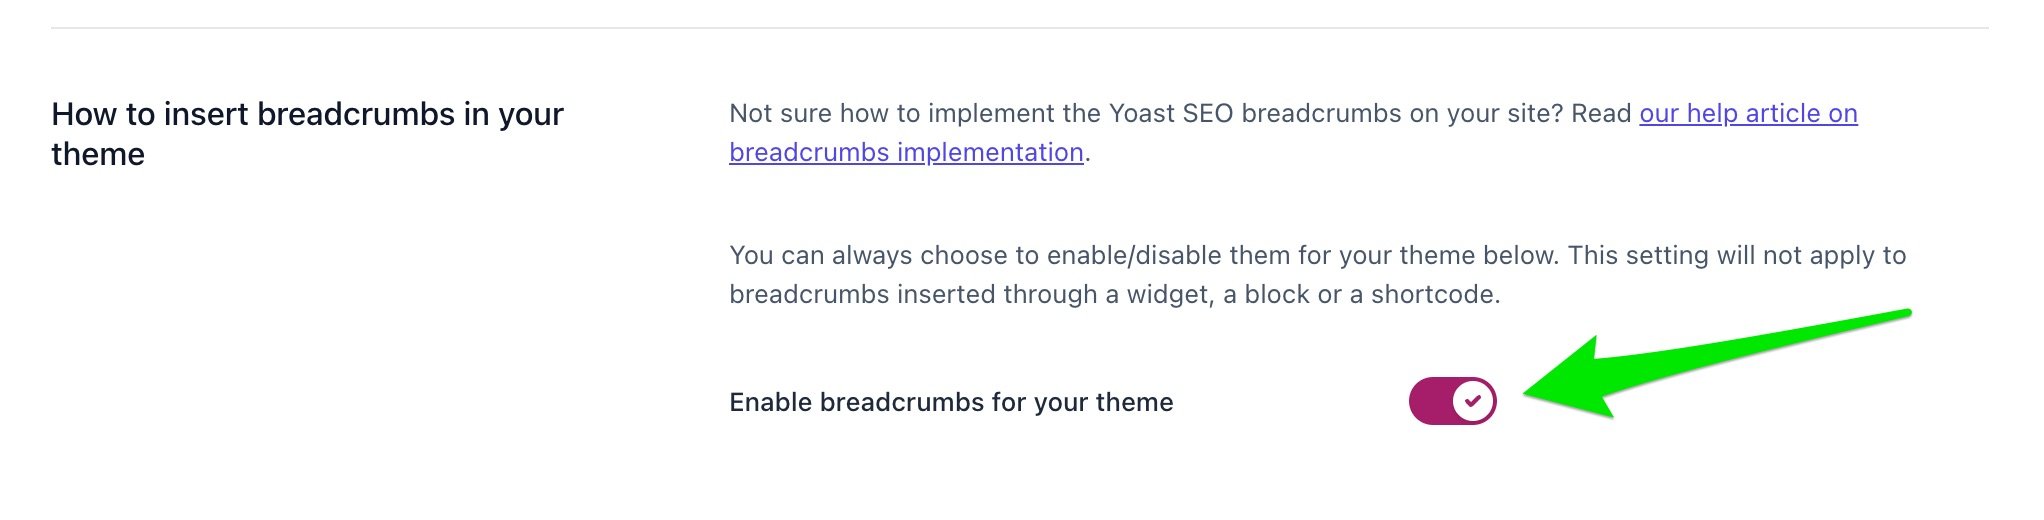 Screenshot of the toggle that allows you to enable/disable breadcrumbs in the Yoast SEO settings.